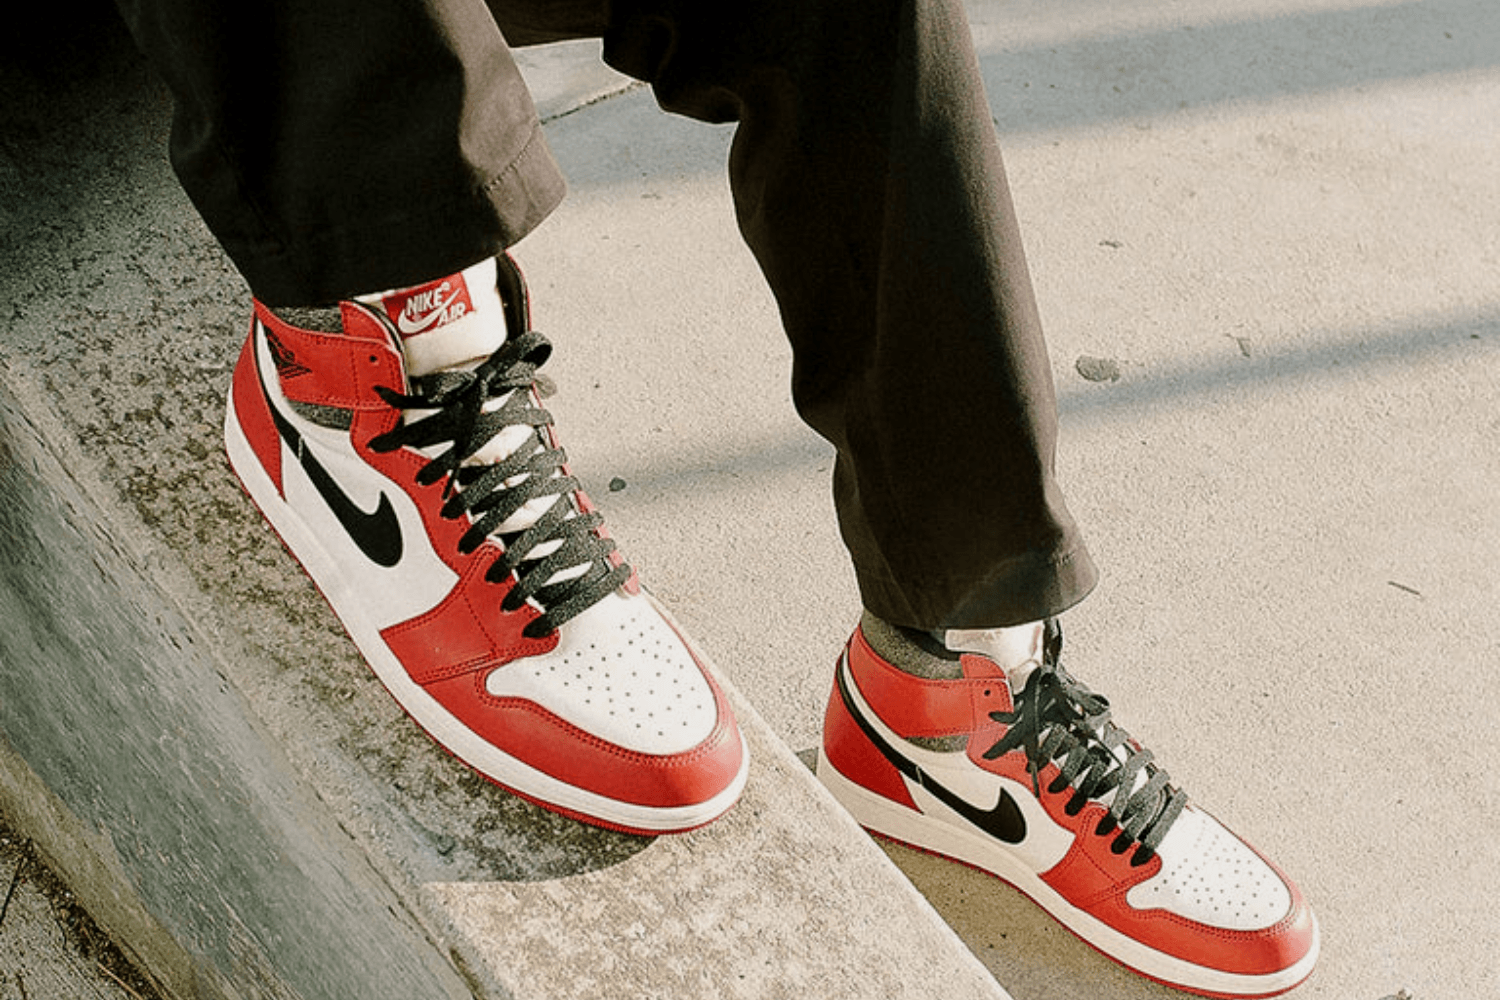 How to style the Air Jordan 1 High